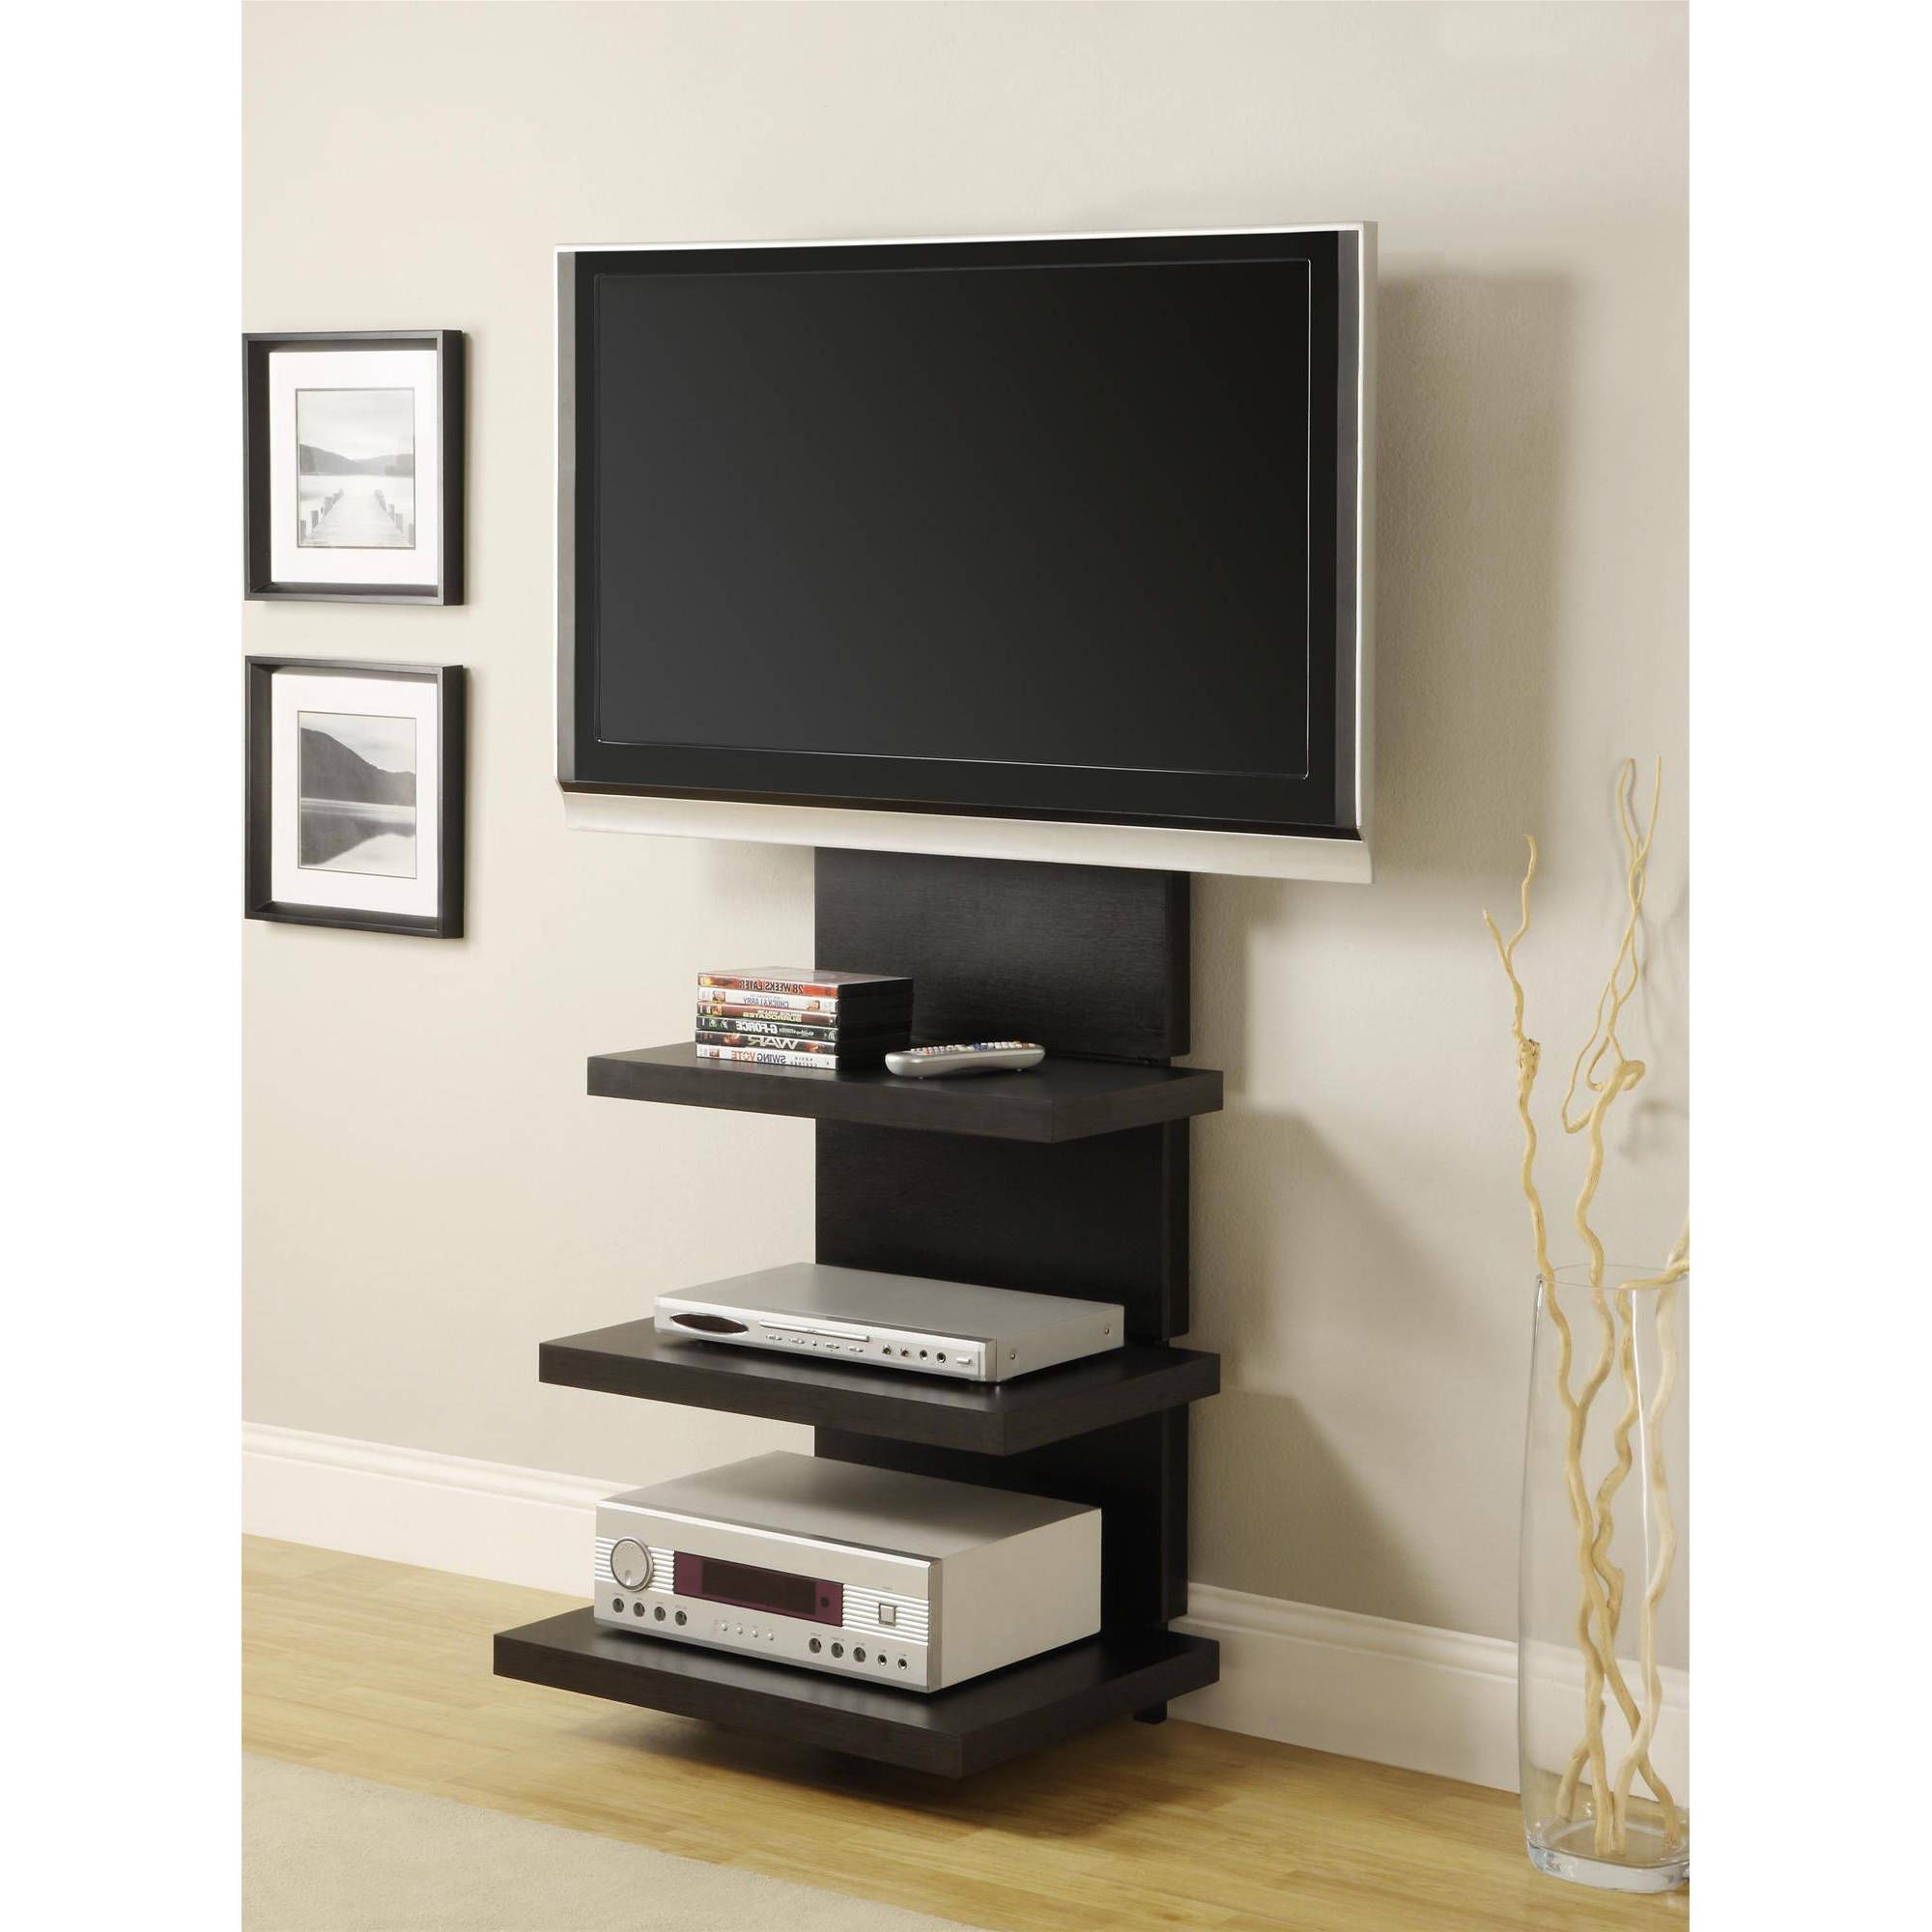 Fashionable Wall Mounted Tv Stands With Shelves Intended For Altra Wall Mount Tv Stand With 3 Shelves, For Tvs Up To 60" (Photo 1 of 20)